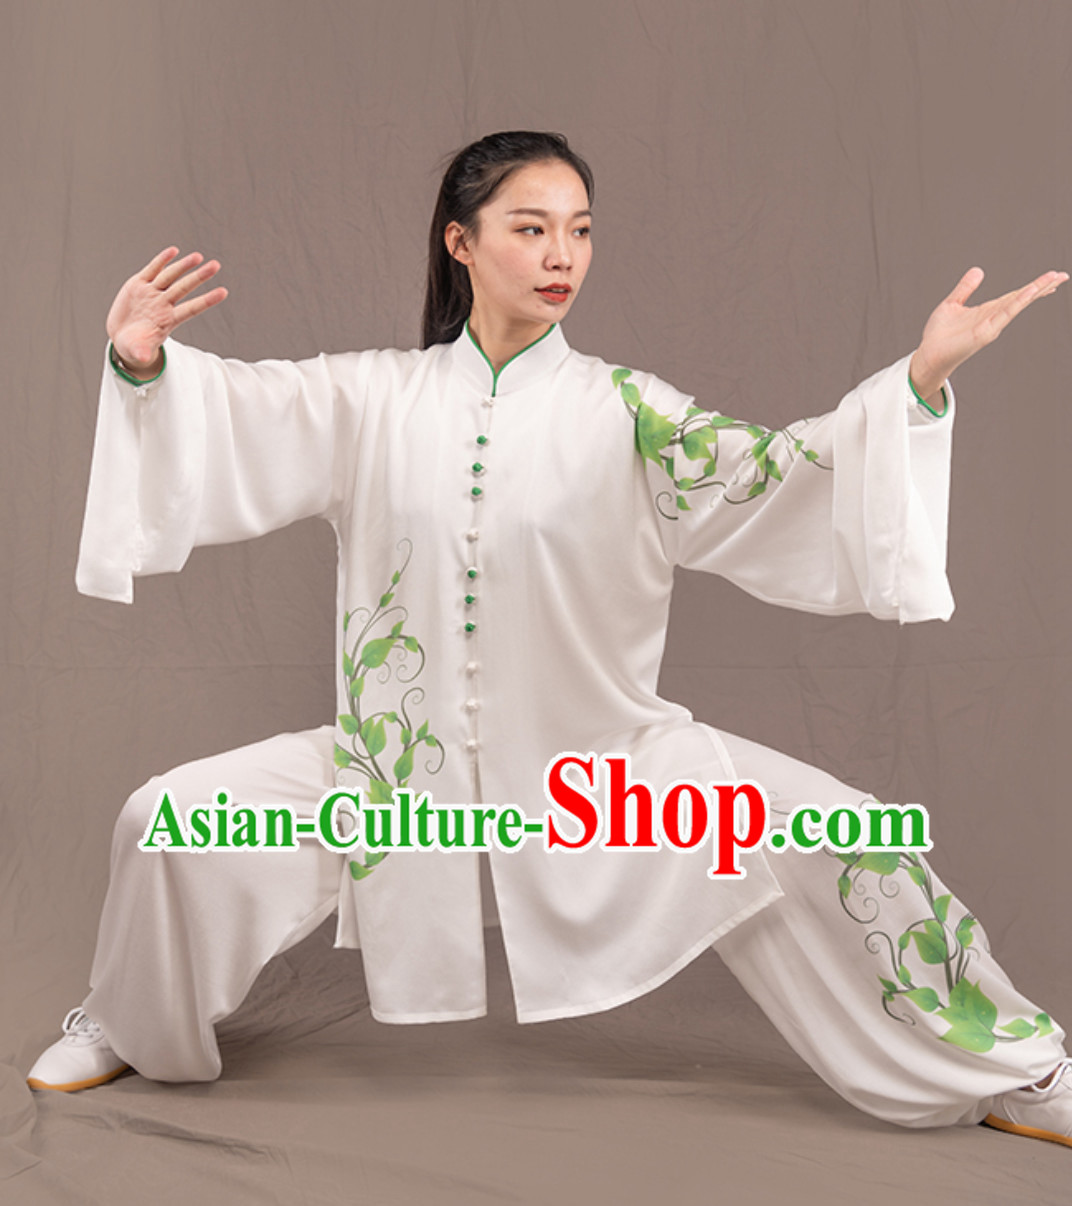 White Top Chinese Traditional Competition Championship Professional Tai Chi Uniforms Taiji Kung Fu Wing Chun Kungfu Tai Ji Sword Gong Fu Master Clothing Suits Clothes Complete Set for Women